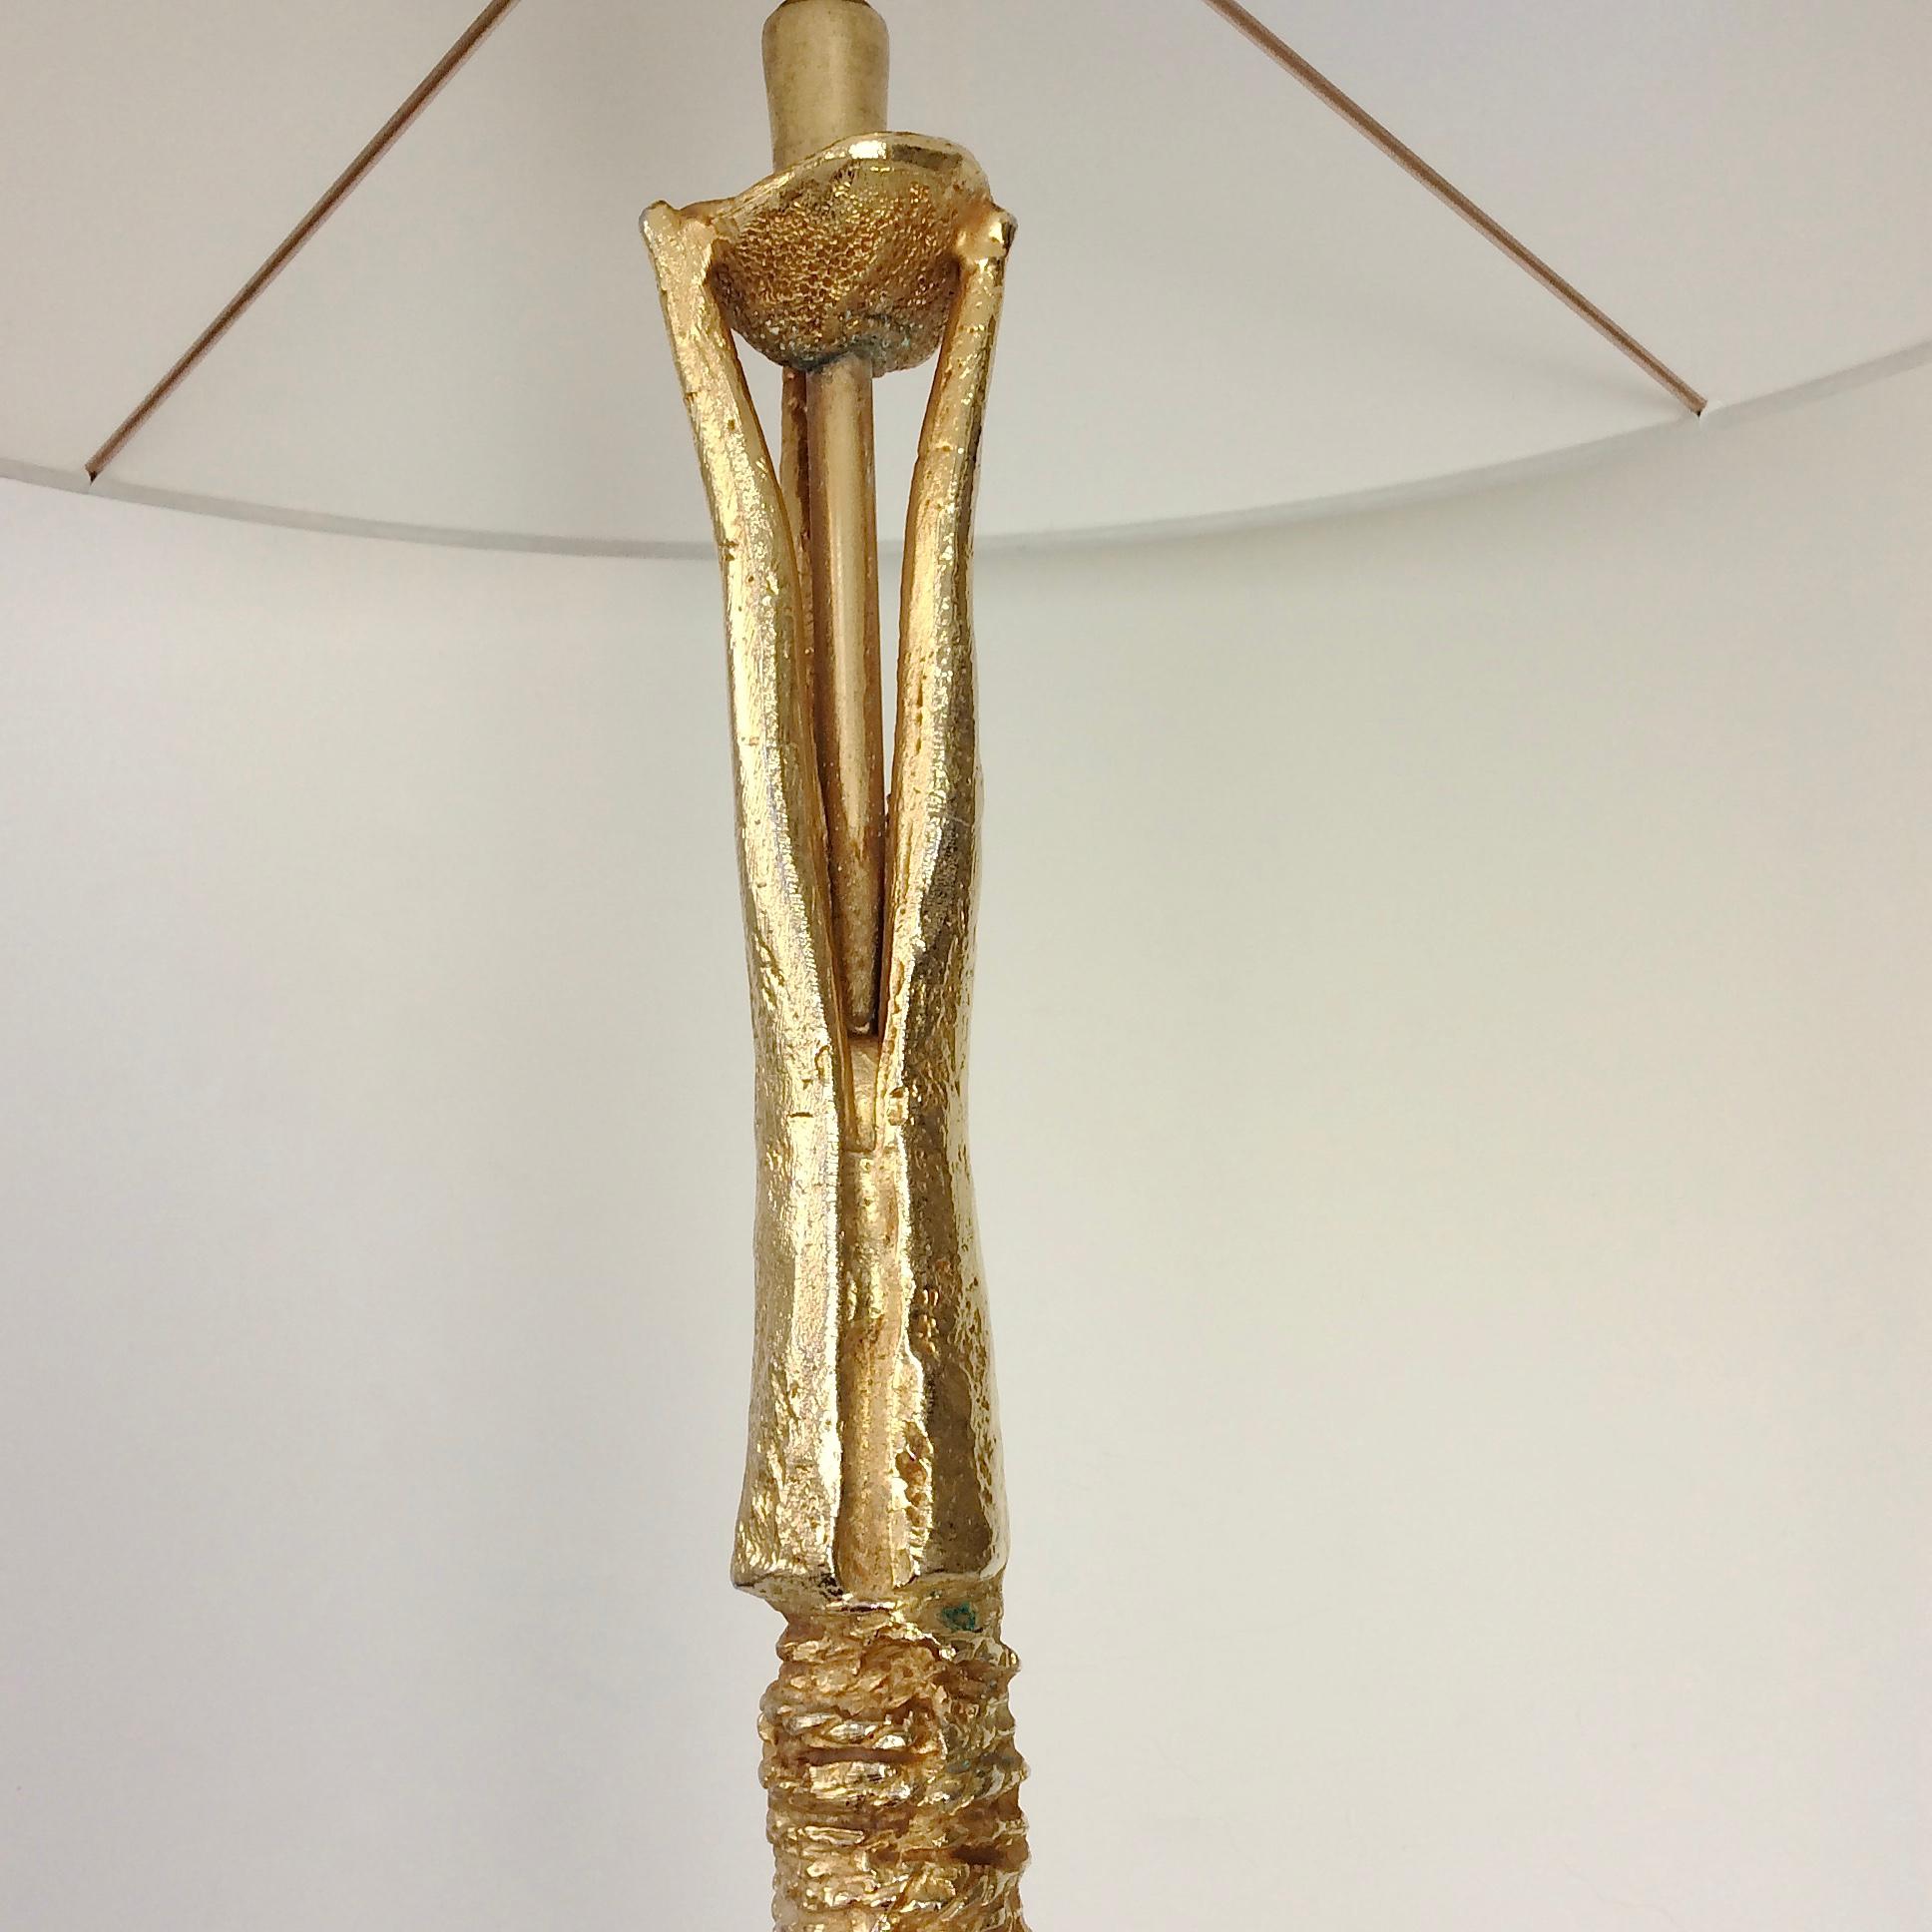 Bronze Table Lamp by Pierre Casenove for Fondica, circa 1990, France For Sale 4